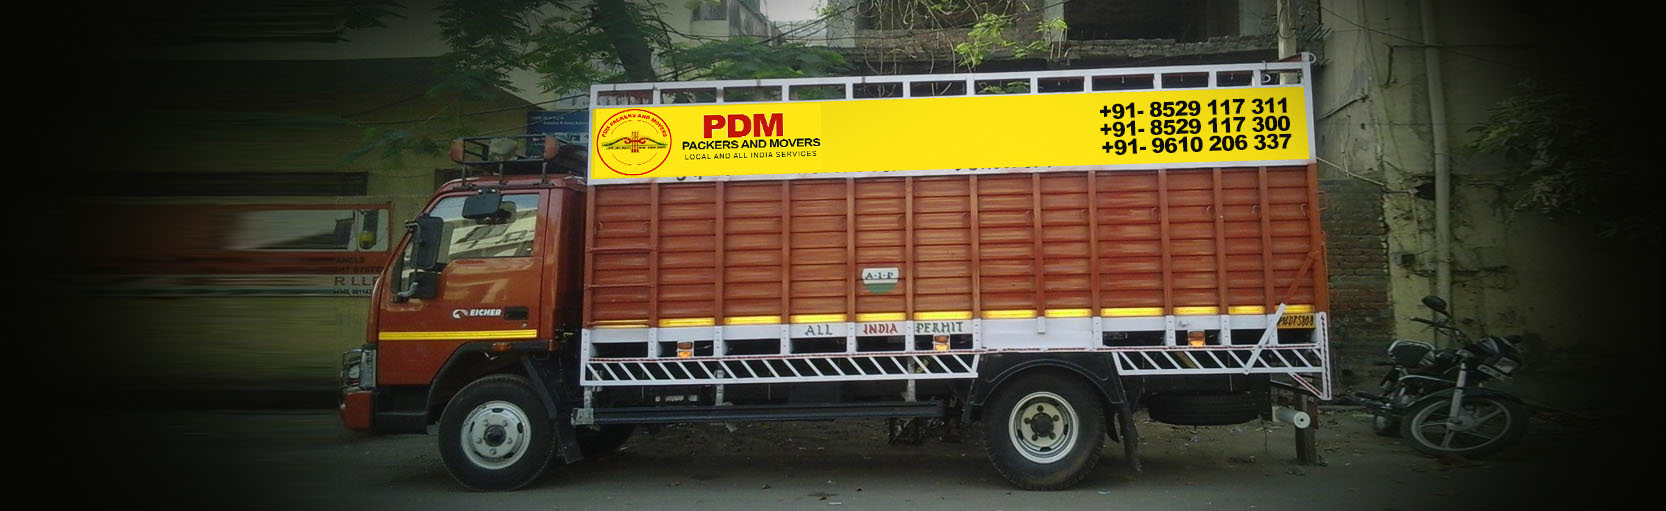 PDM packers and movers